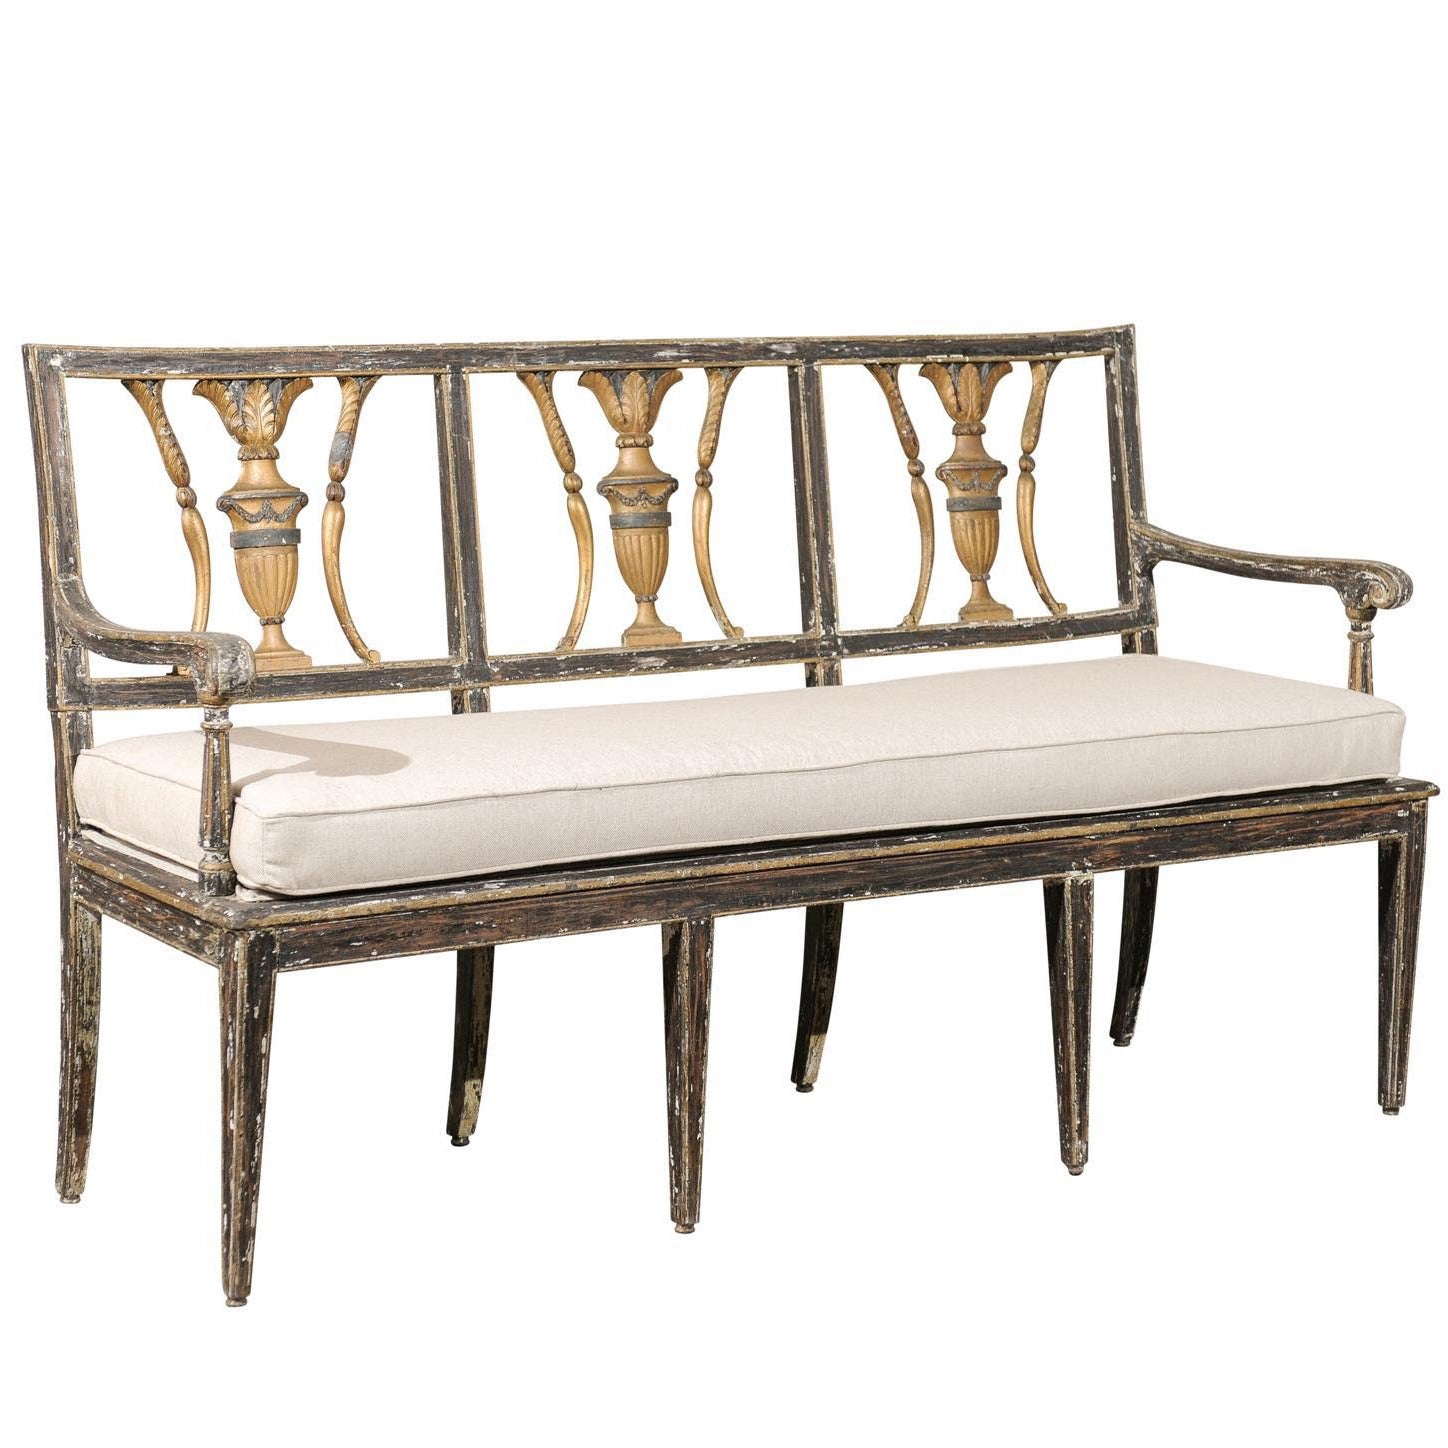 Early 19th Century Italian Painted and Gilded Wooden Bench